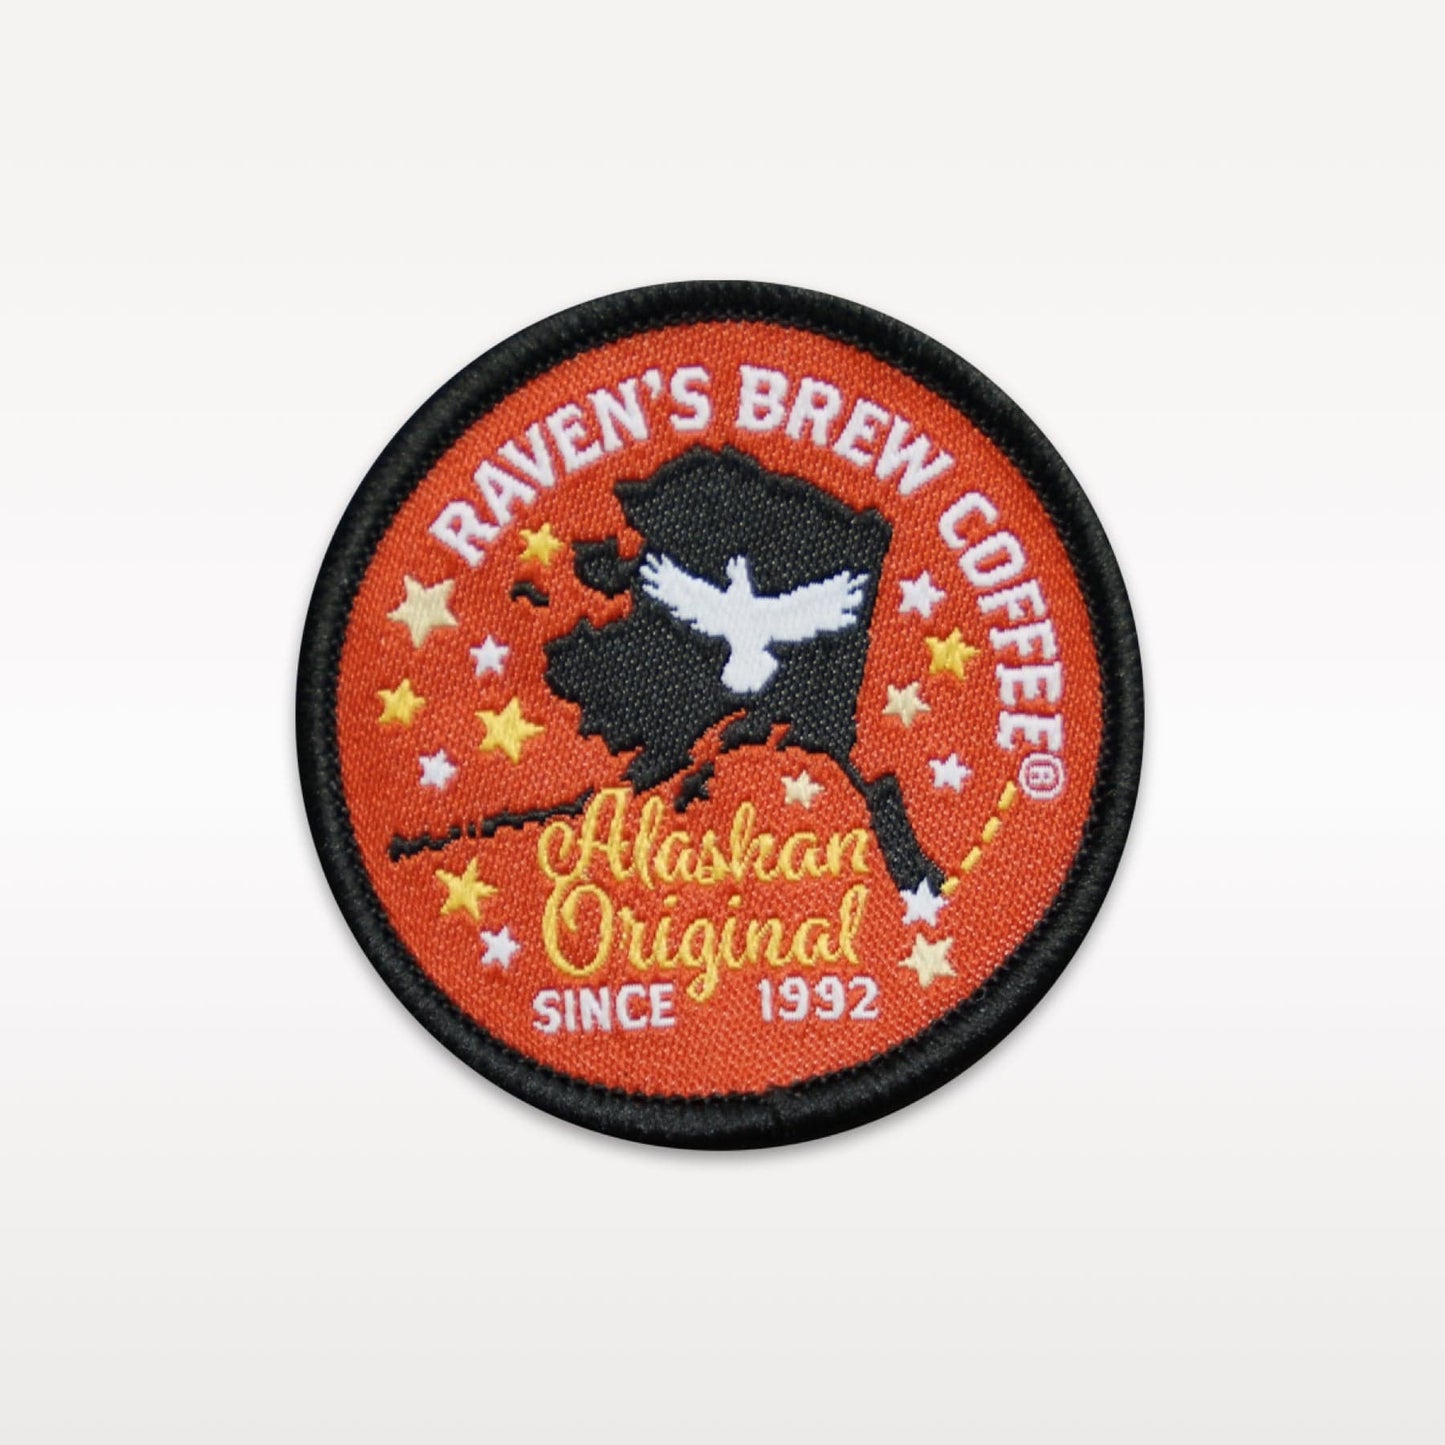 Round Raven's Brew Coffee embroidered patch featuring a raven within a silhouette of Alaska, surrounded by stars, with the words "Alaskan Original Since 1992" emblazoned at the bottom.